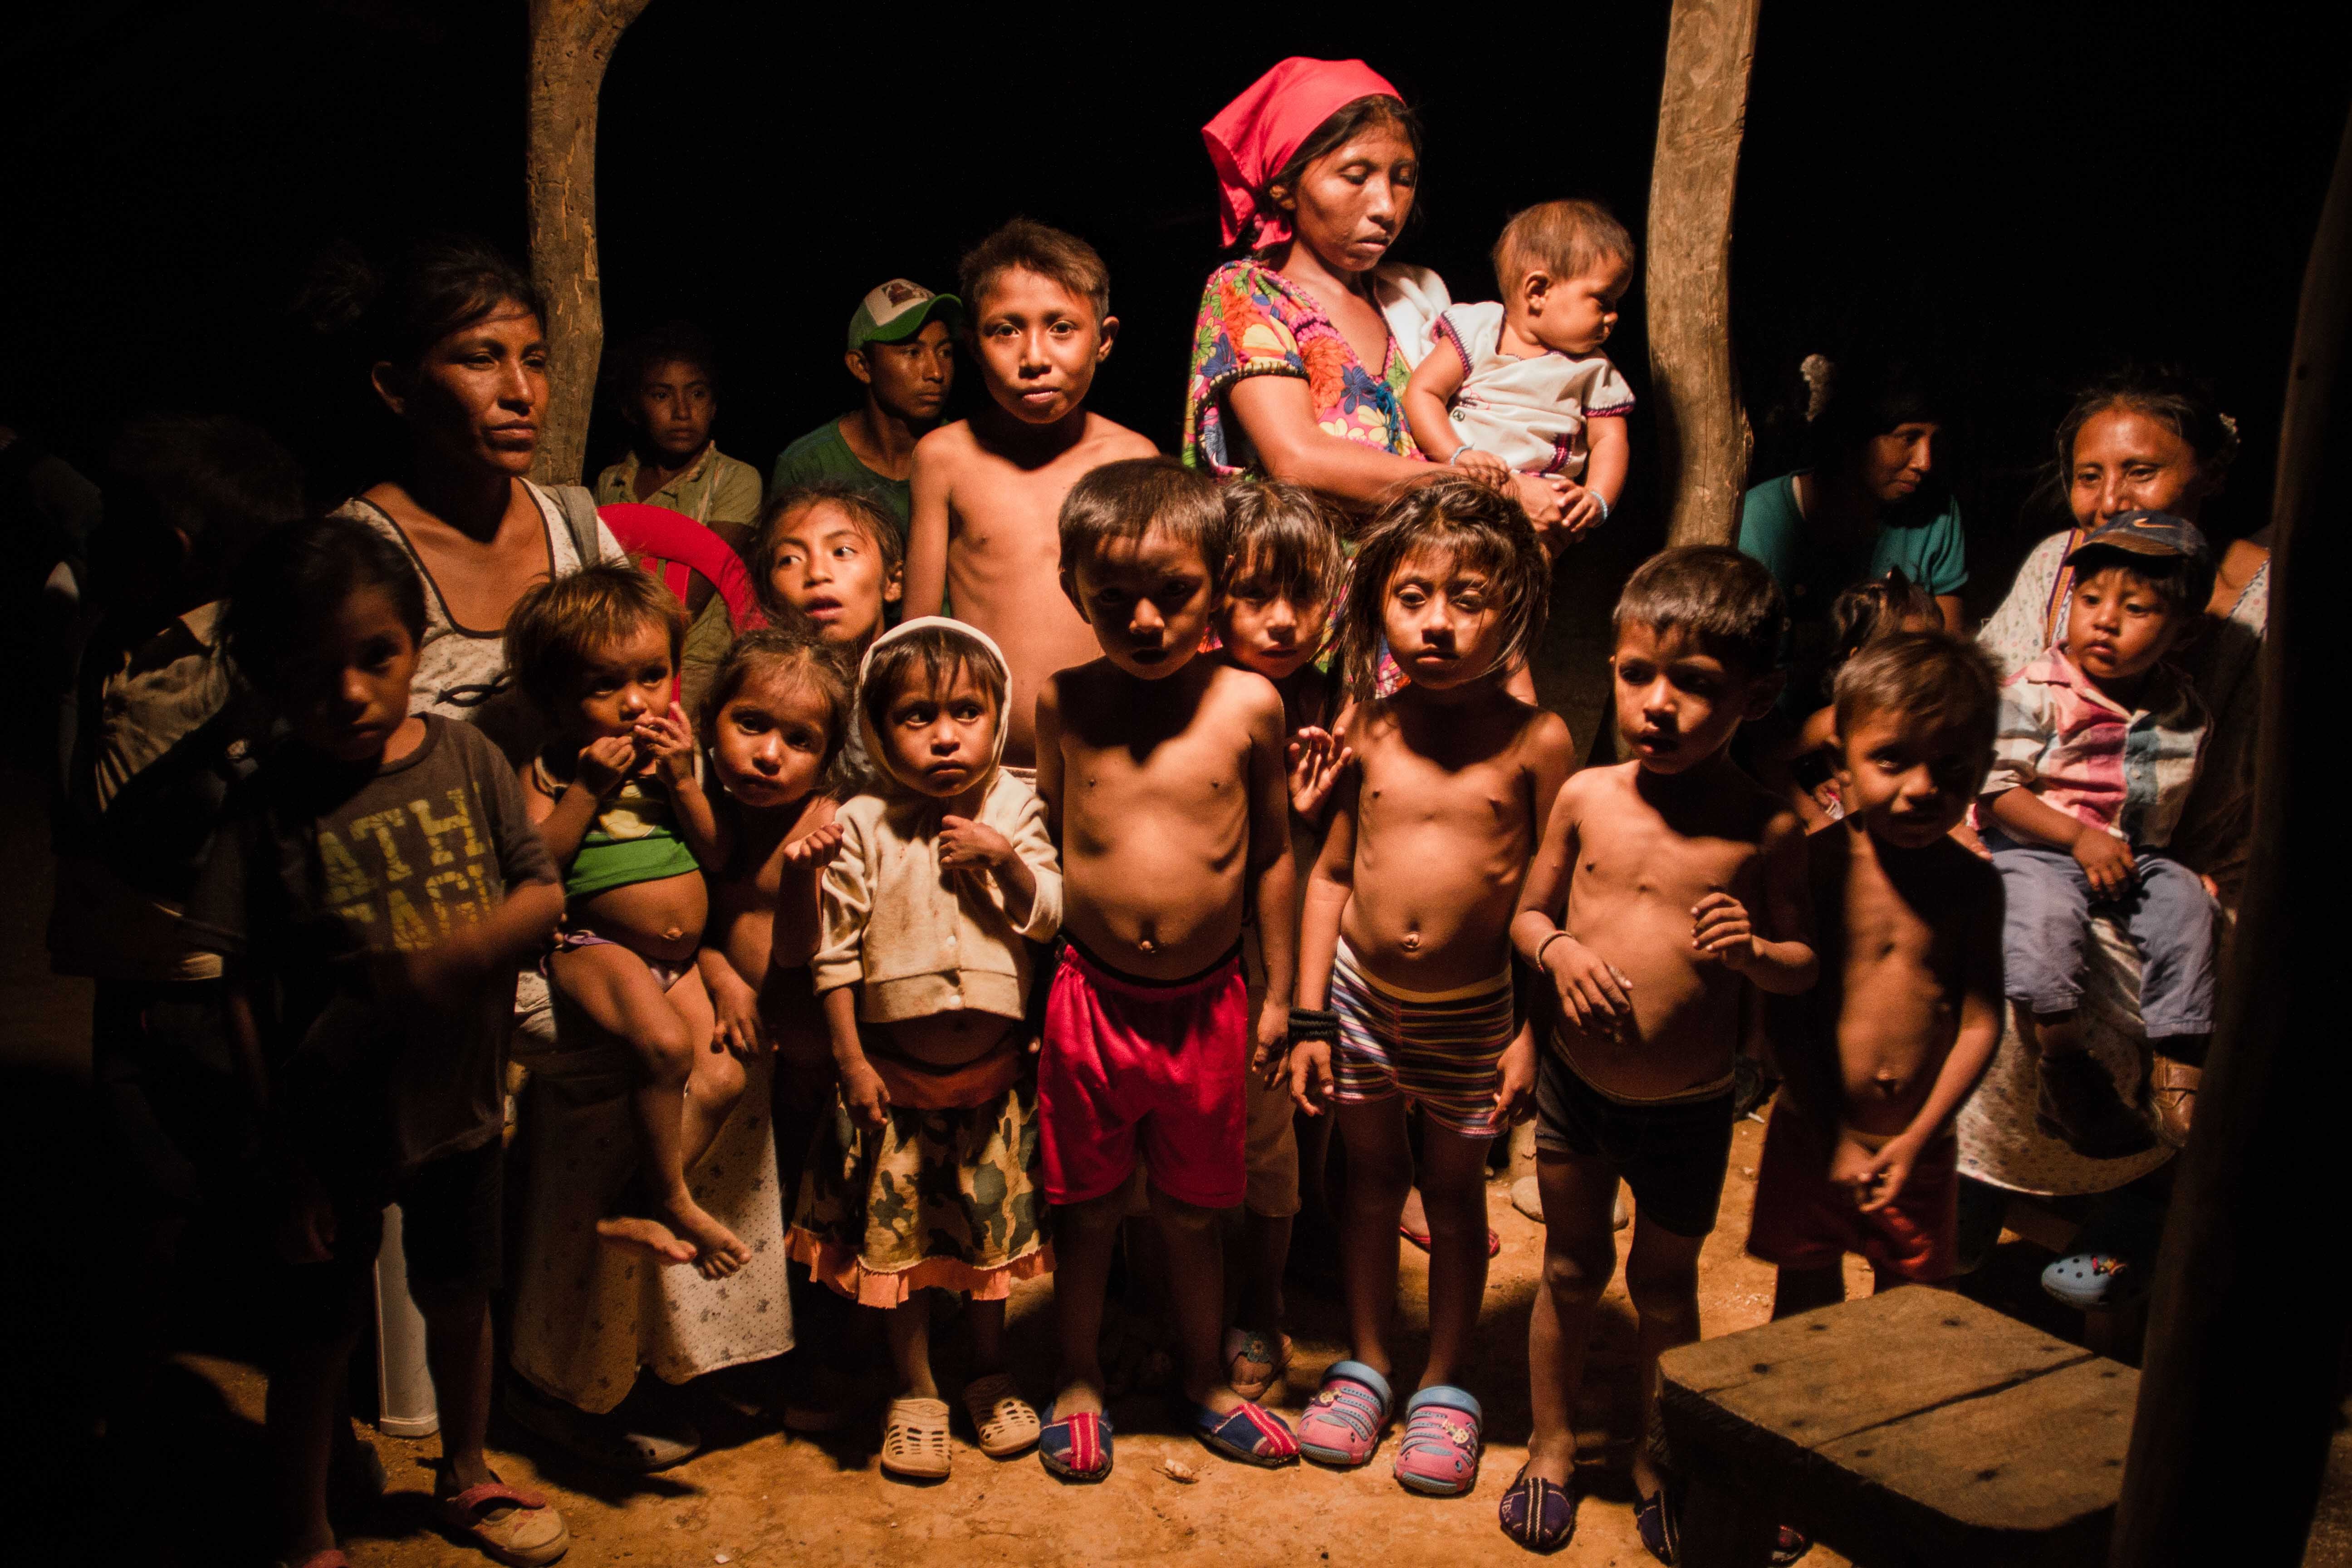 Colombia: Indigenous Kids at Risk of Malnutrition, Death - Human Rights Watch